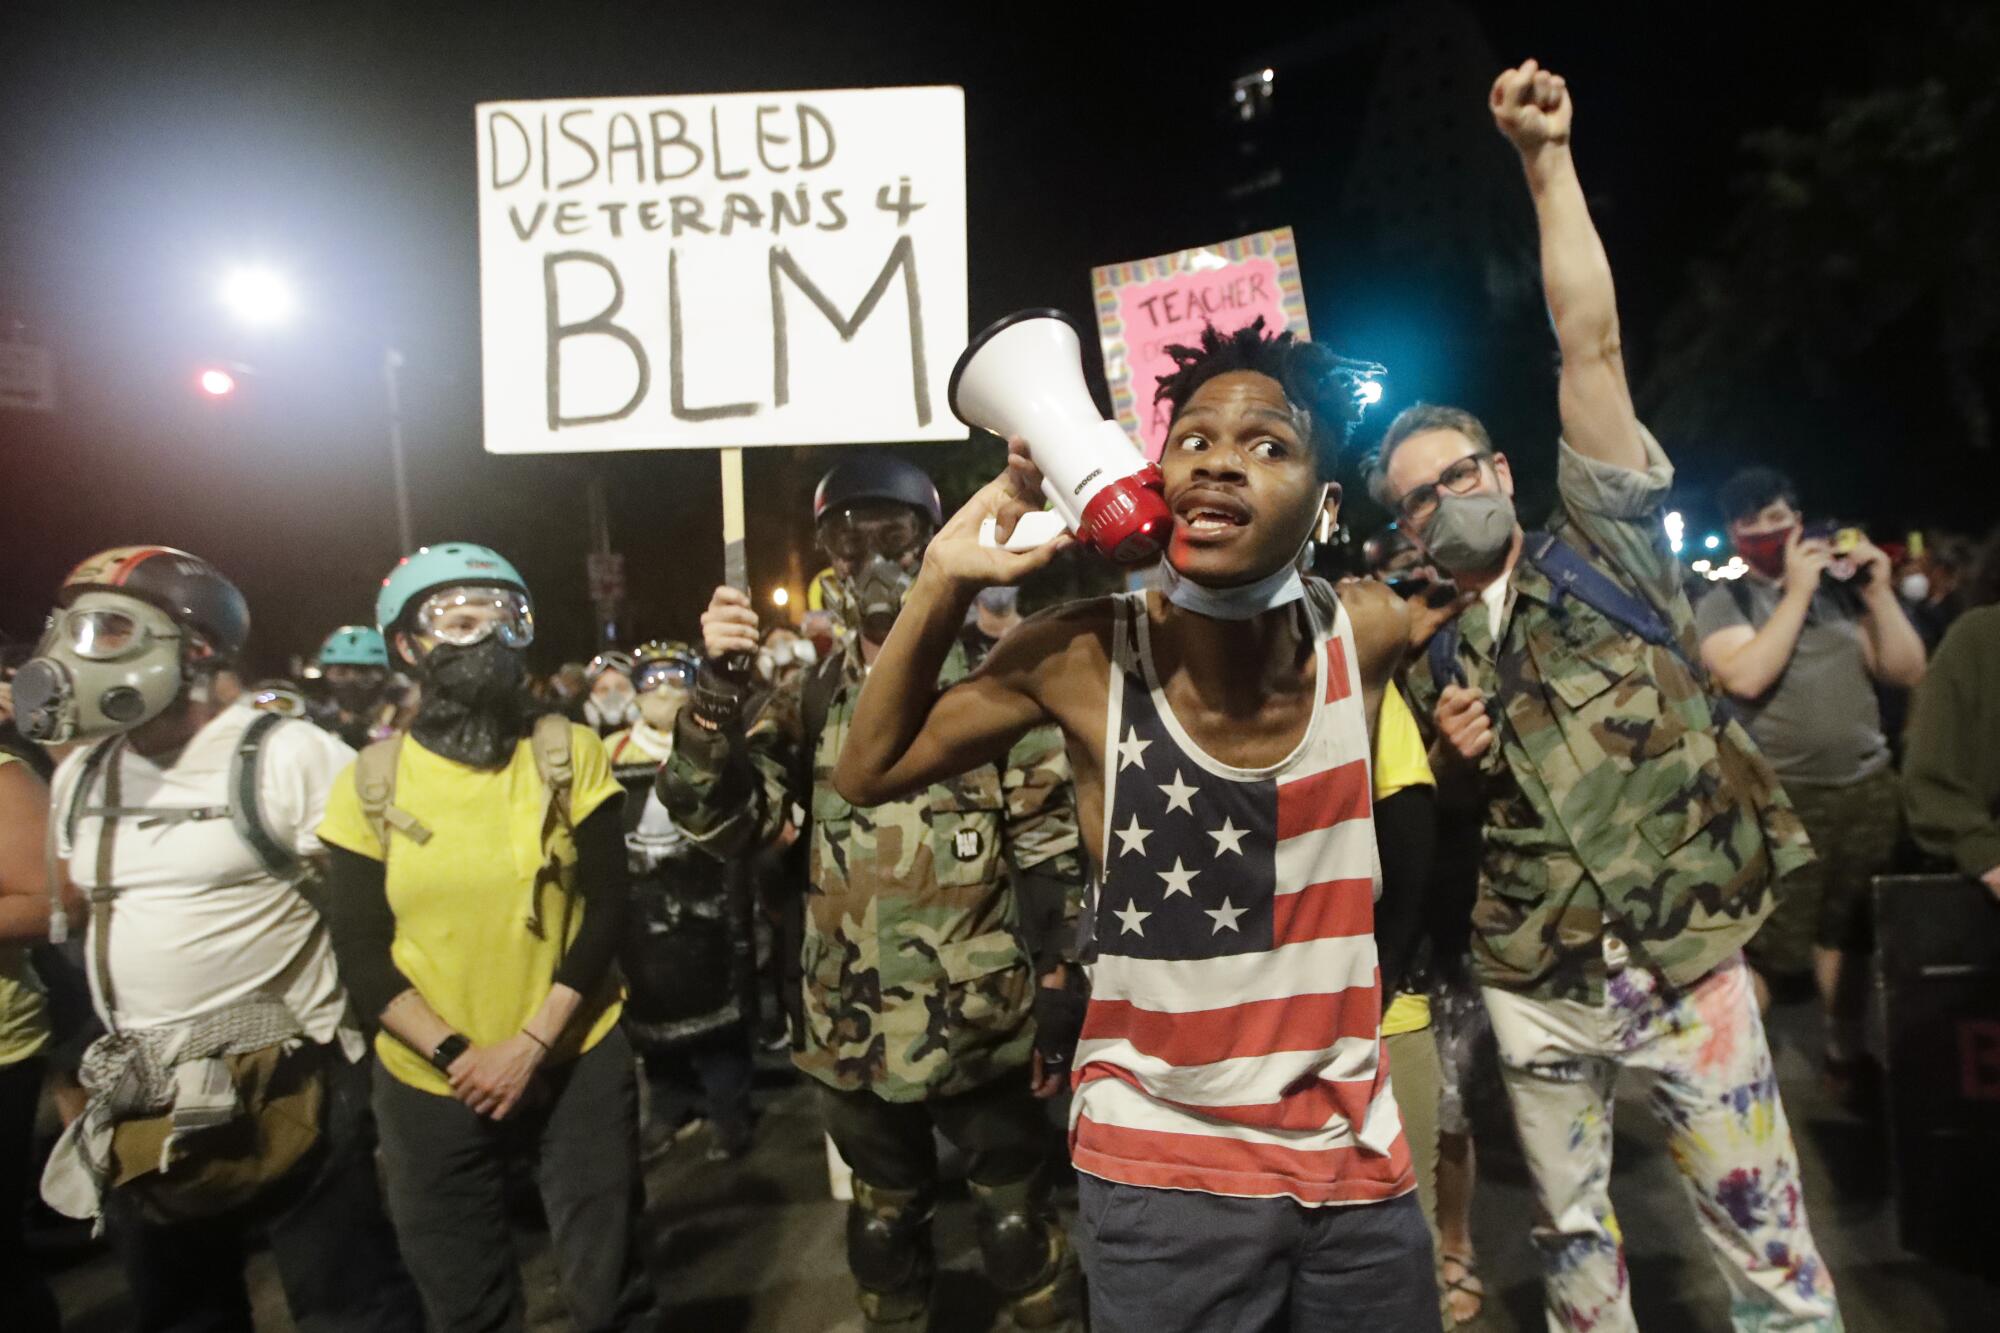 A demonstrator shouts slogans next to military veterans during a Black Lives Matter protest in Portland, Ore.